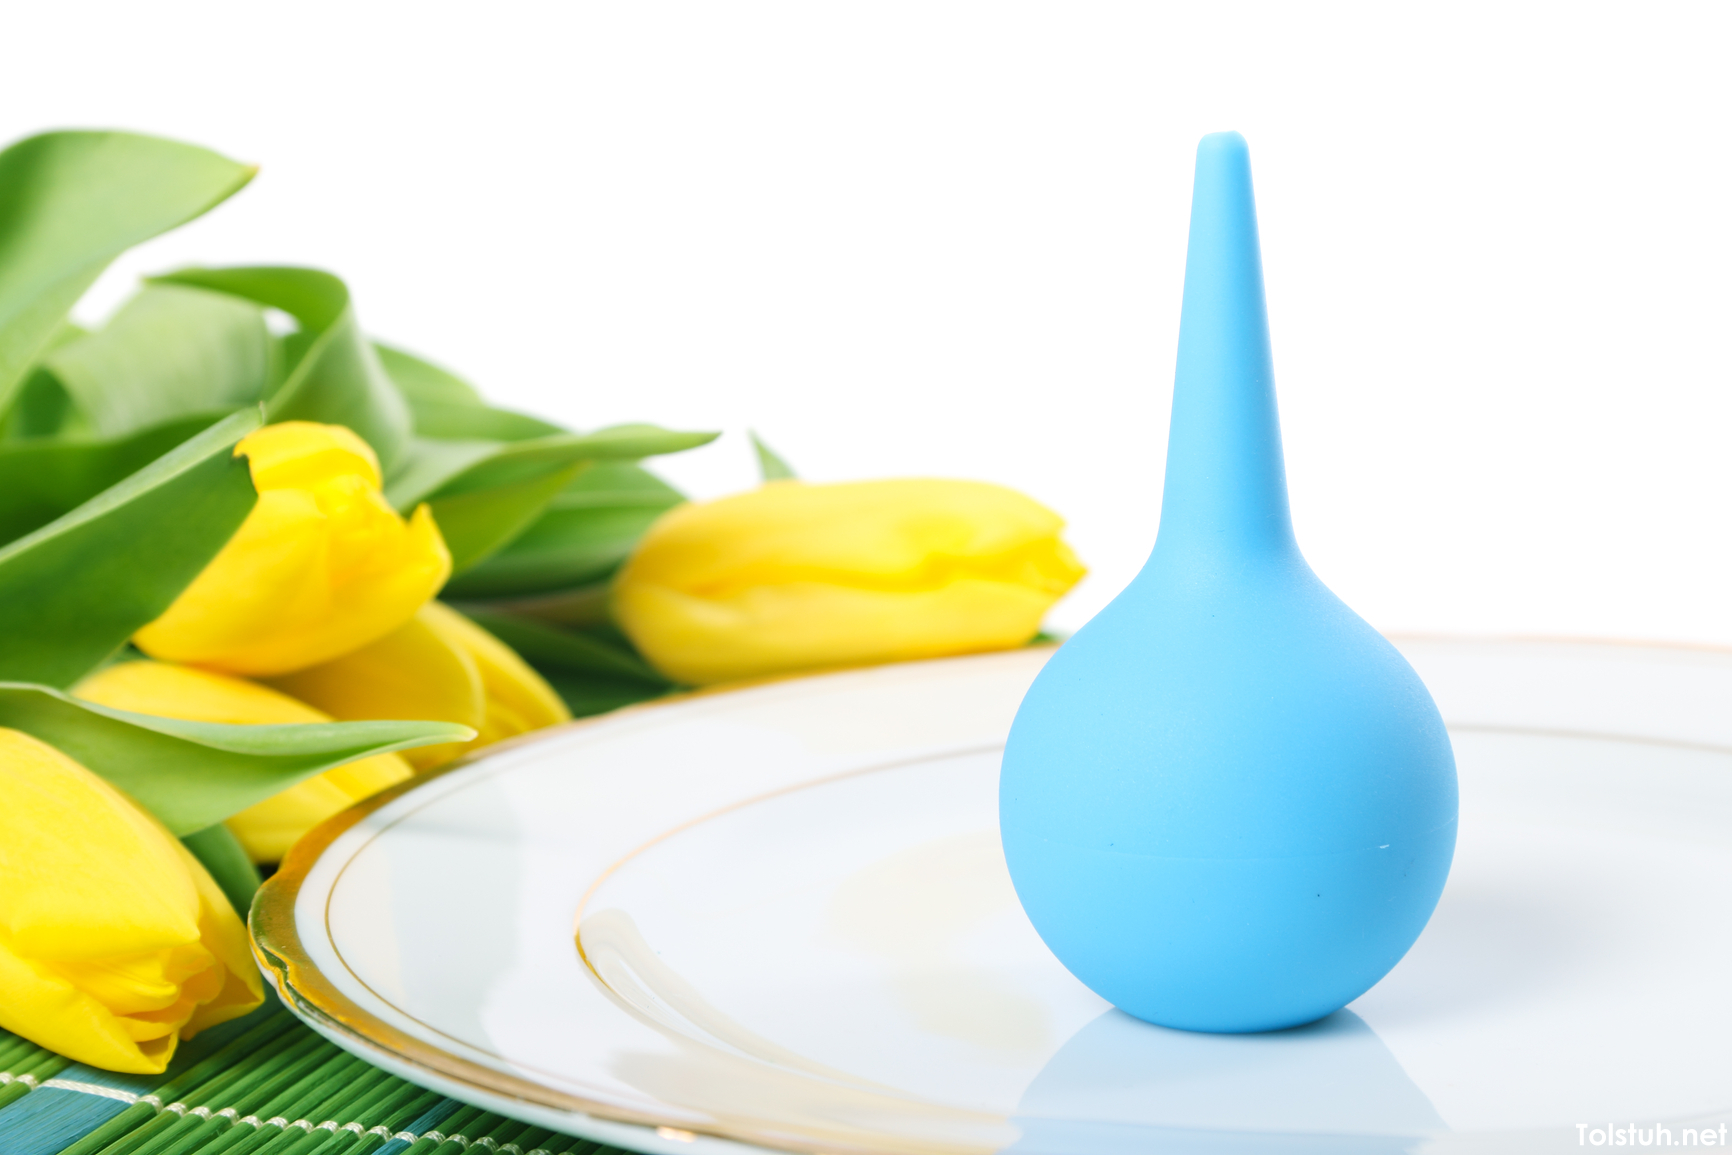 Blue enema on plate and tulips isolated on white background